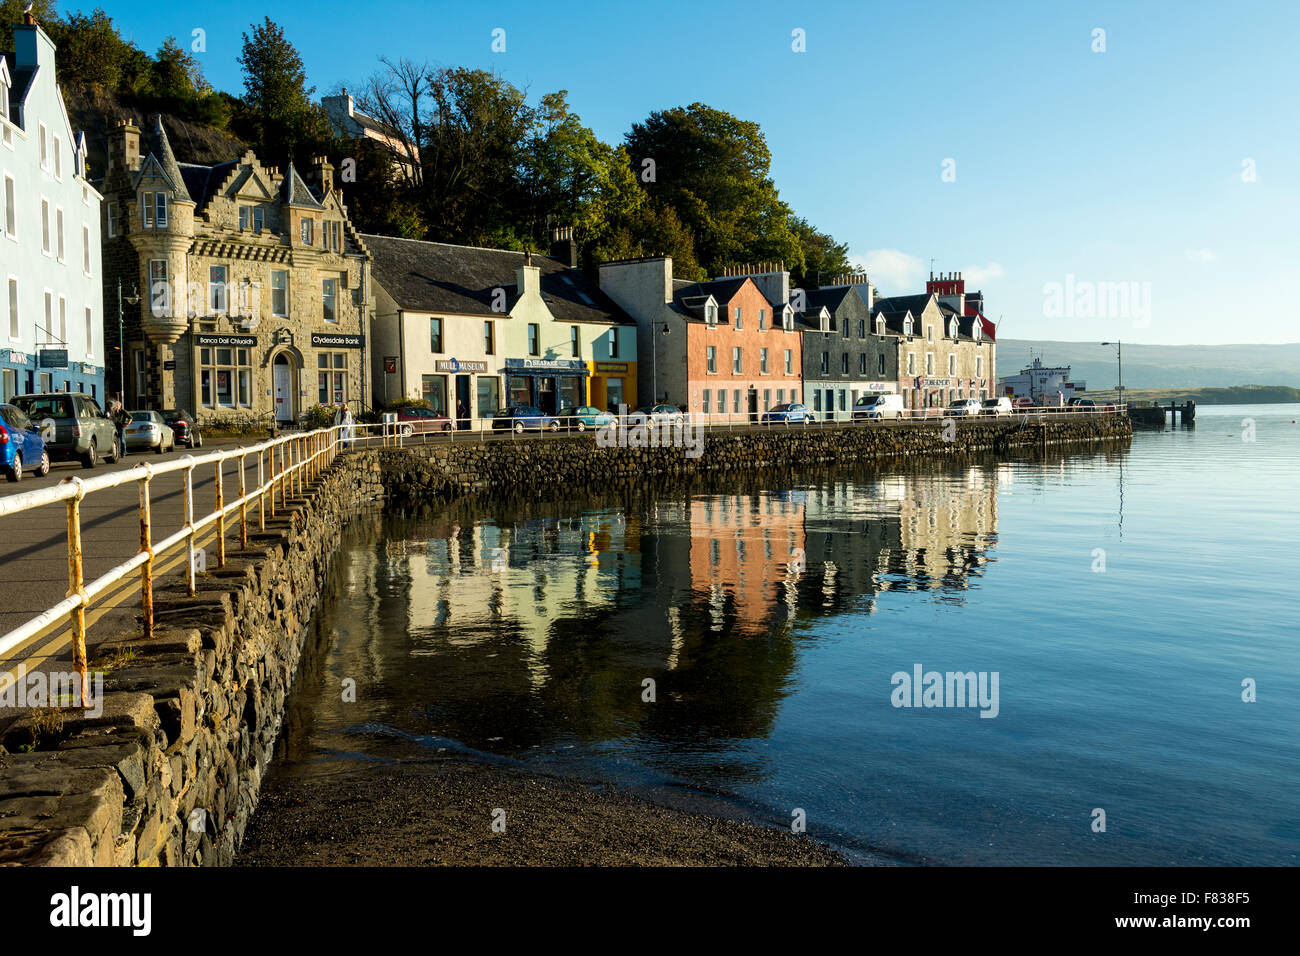 Shops and other buildings on Main Street, Tobermory, Isle of Mull, Argyll and Bute, Scotland, UK. Stock Photo